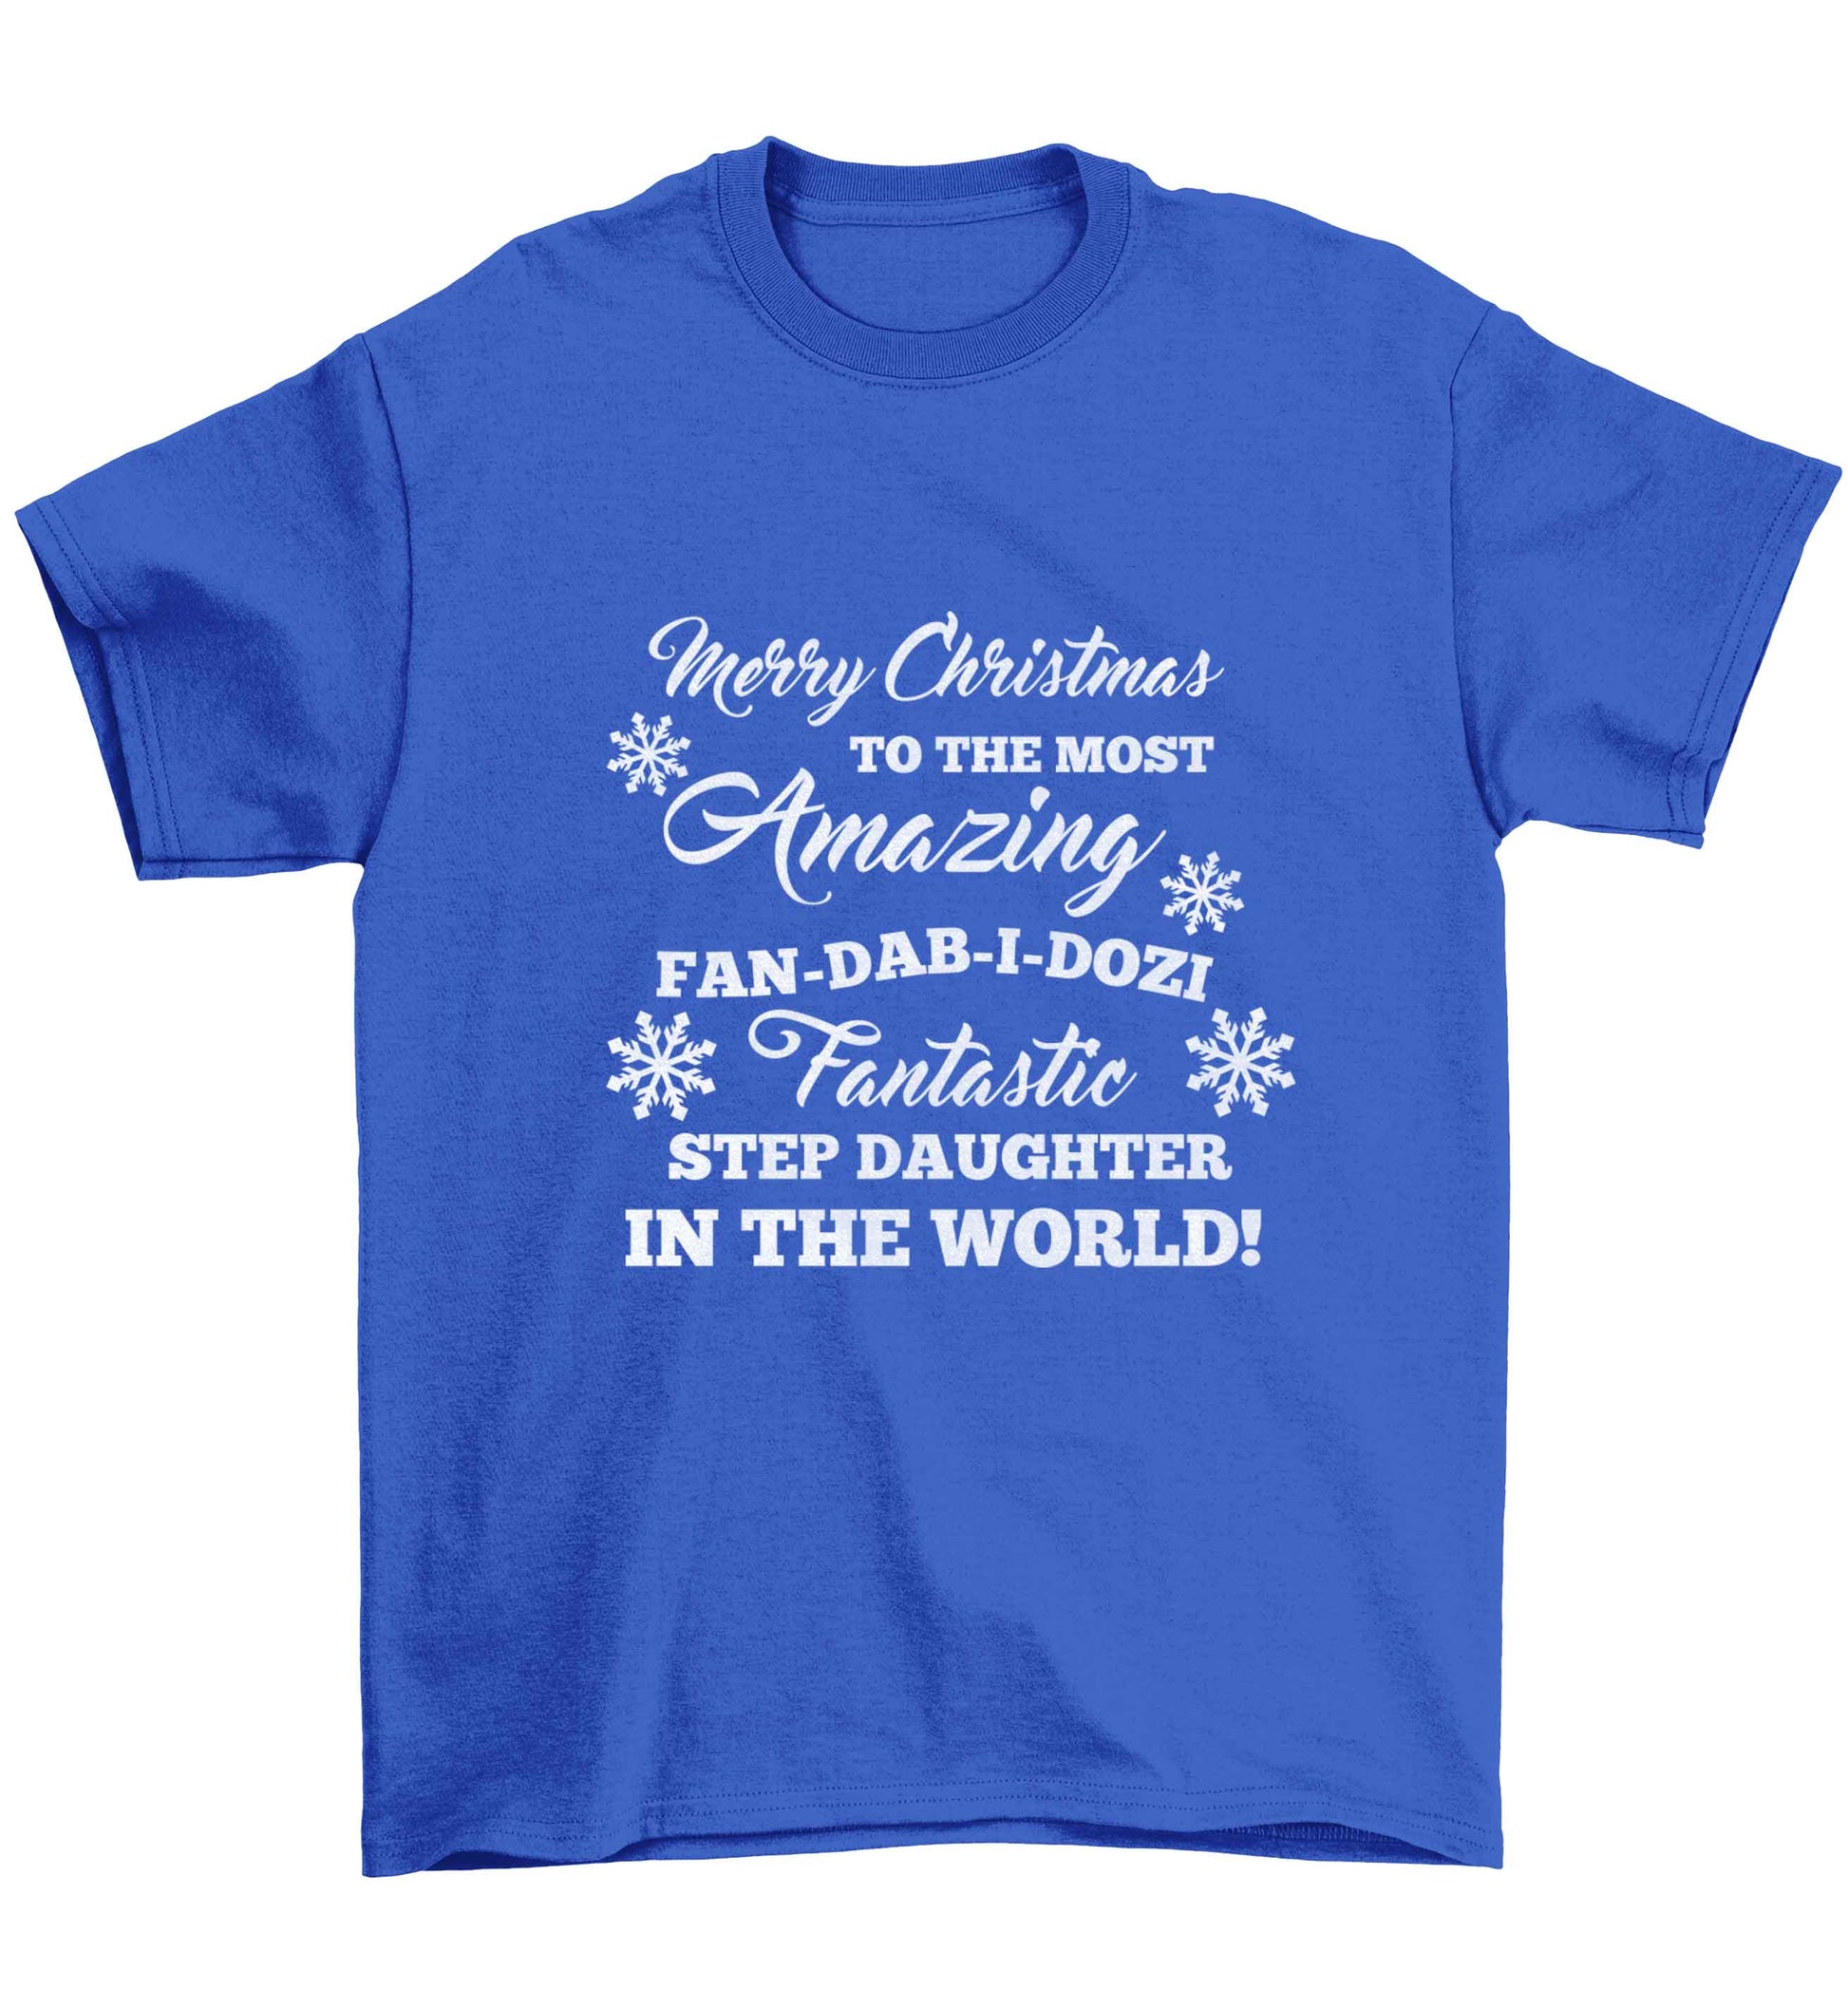 Merry Christmas to the most amazing fan-dab-i-dozi fantasic Step Daughter in the world Children's blue Tshirt 12-13 Years